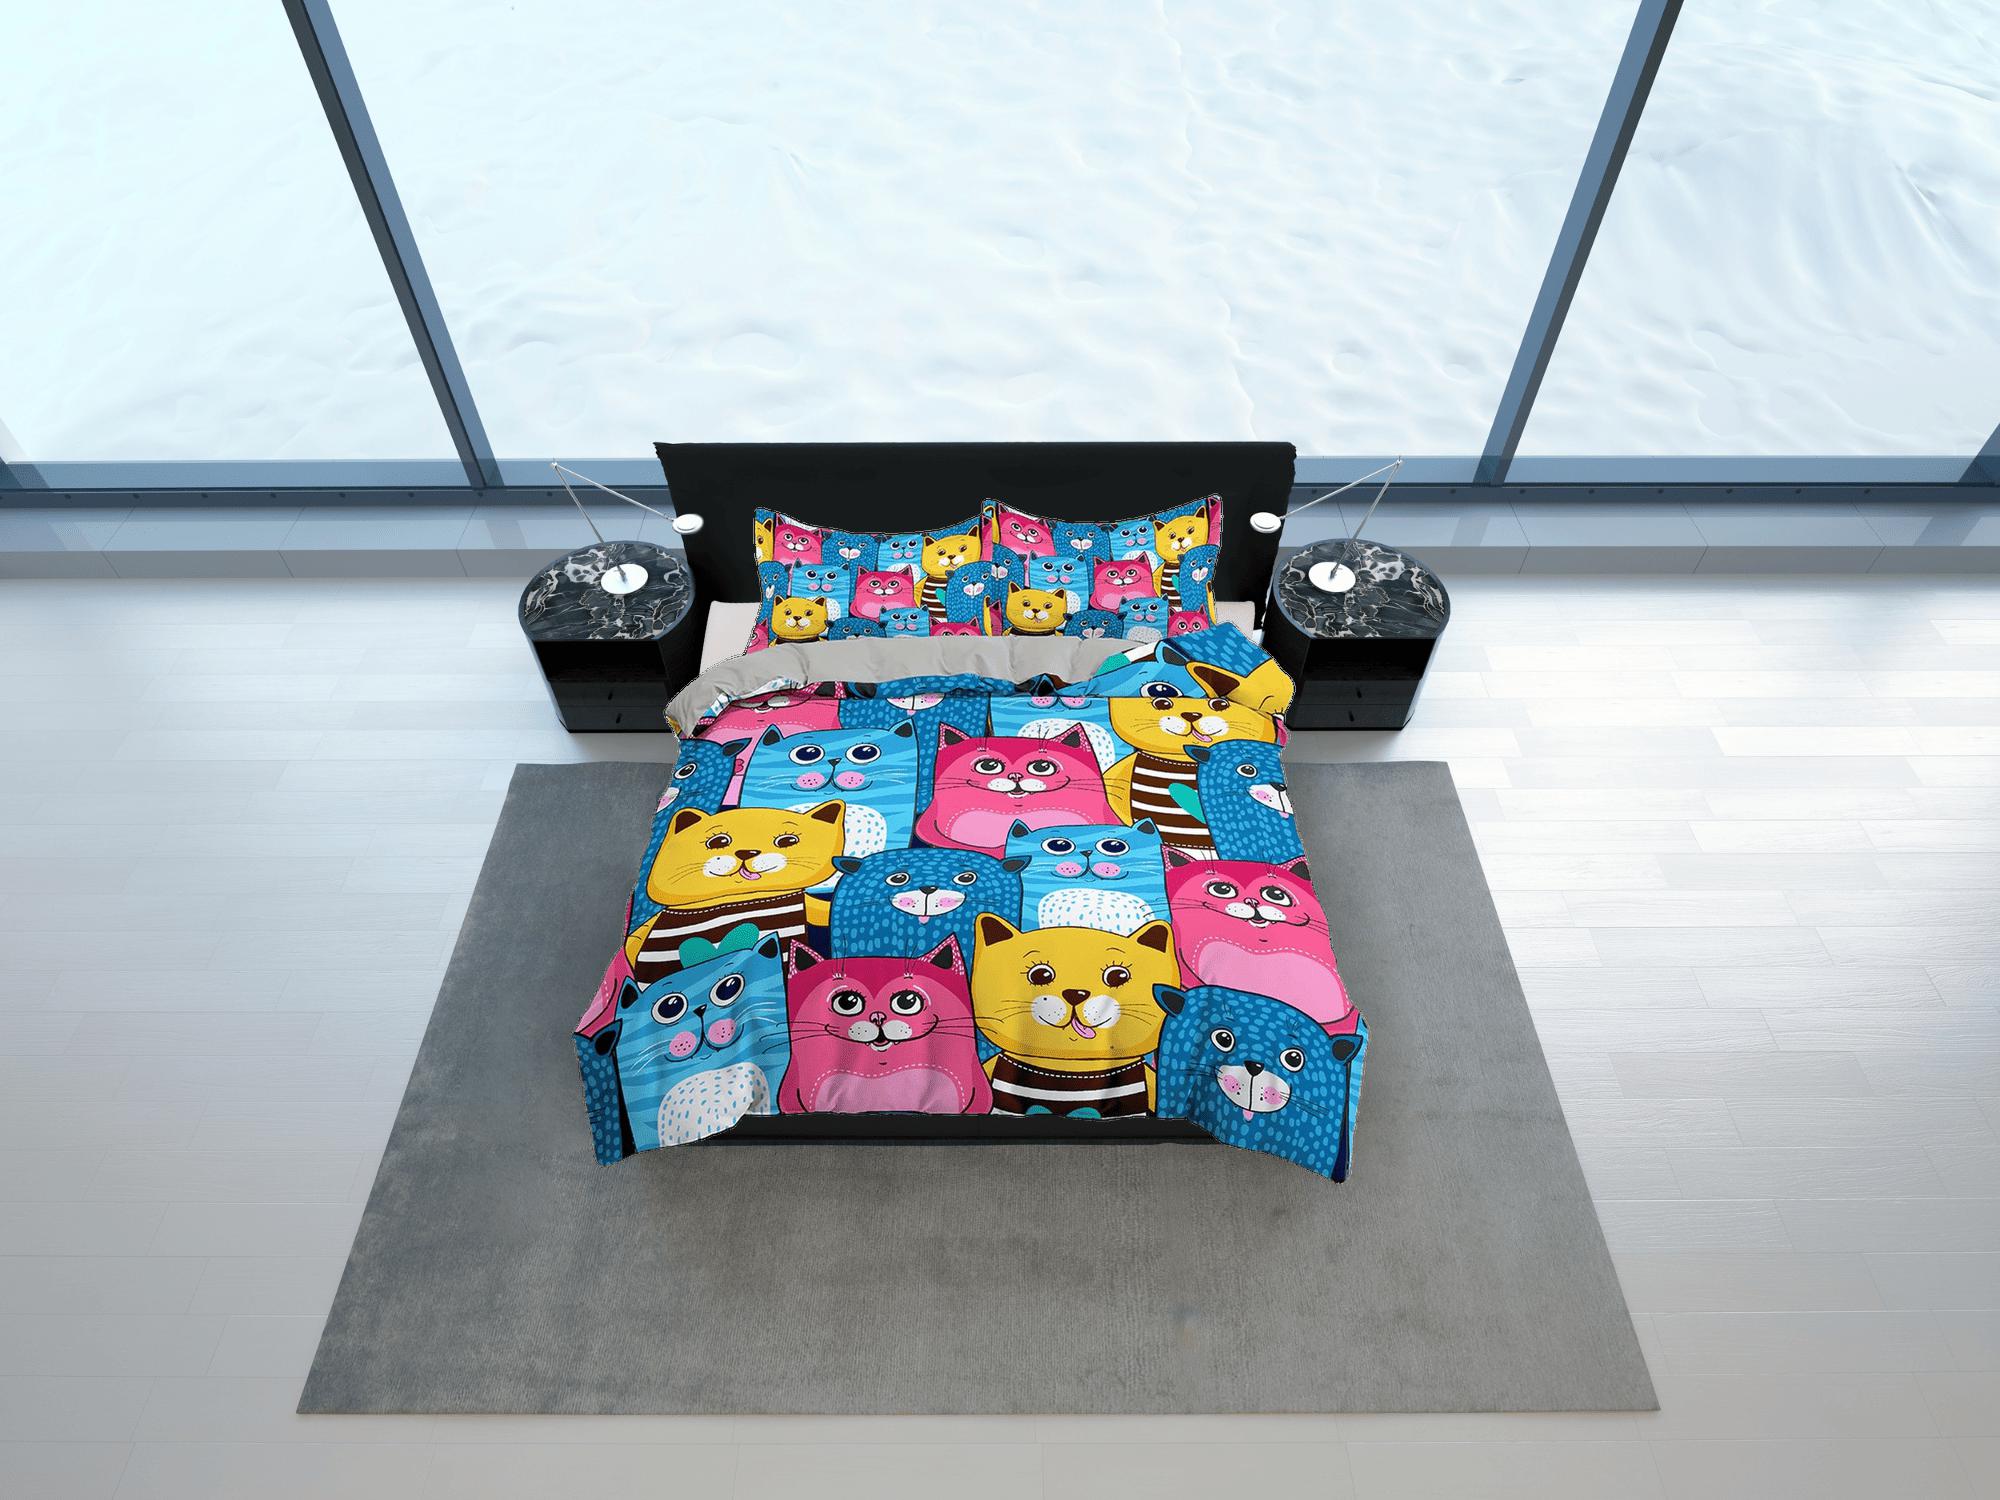 daintyduvet Blue, Pink and Yellow Cute Cats Kids Duvet Cover Set, Toddler Bedding, Kids Bedroom, Colorful Bedding, Duvet King Queen Full Twin Single